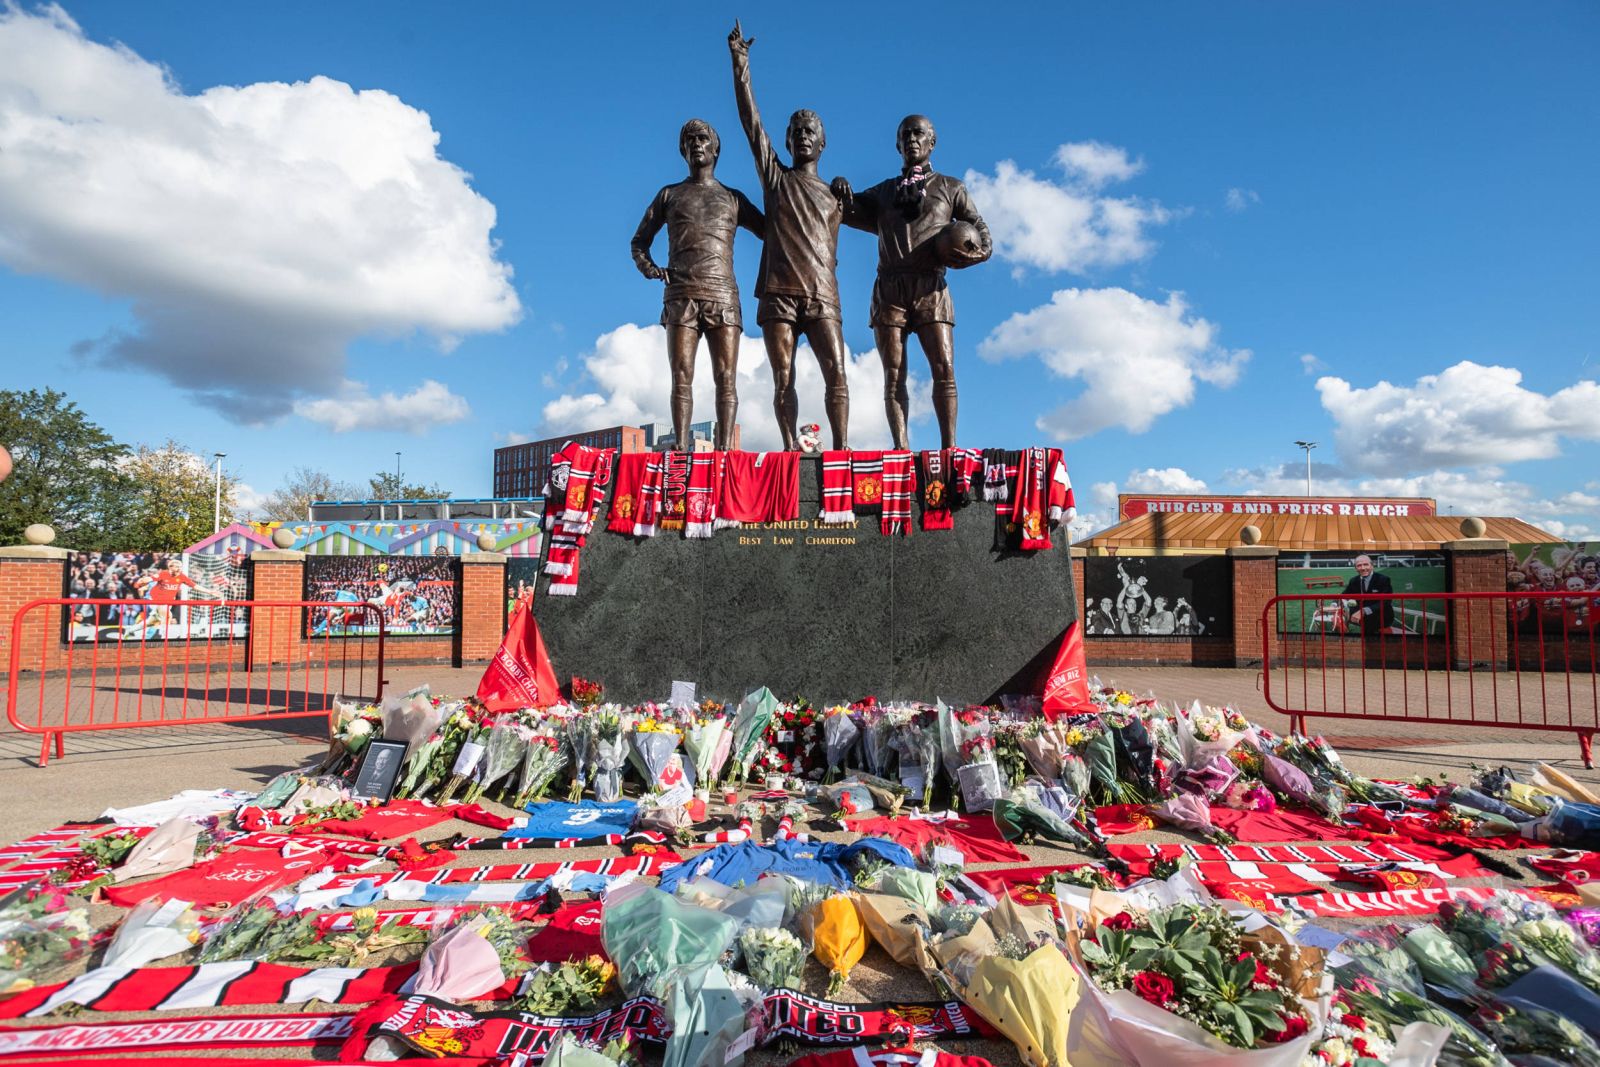 Floral tributes around the ÔUnited TrinityÕ statue outside Old Trafford football ground in Manchester on Sunday 22 October 2023. Fans have gathered following the announcement of the death of former Manchester United player Sir Bobby Charlton on Saturday. Charlton, who passed peacefully in the early hours of Saturday morning after being diagnosed with dementia in 2020, lifted three league titles, an FA Cup and a European Cup in a distinguished 17-year career at Old Trafford. He also scored 49 goals in 106 appearances for the Three Lions, famously helping them win the World Cup in 1966. Manchester Greater Manchesrer England Old Trafford PUBLICATIONxNOTxINxUK Copyright: xMattxWilkinsonx